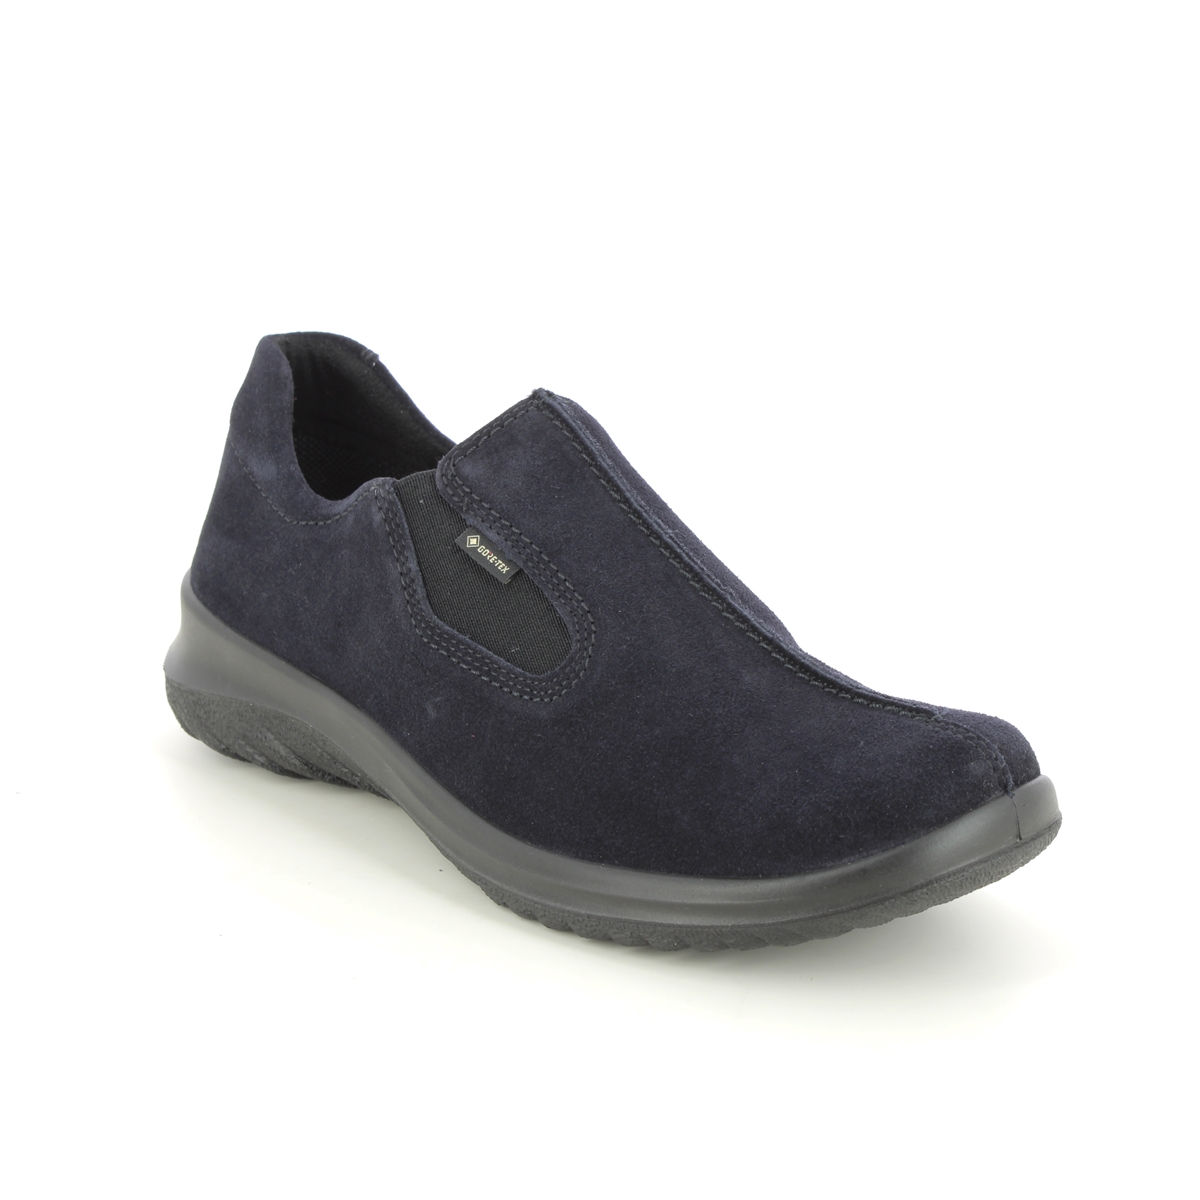 Legero Soft Shoe Gtx Navy Suede Womens Comfort Slip On Shoes 09568-80 In Size 5 In Plain Navy Suede